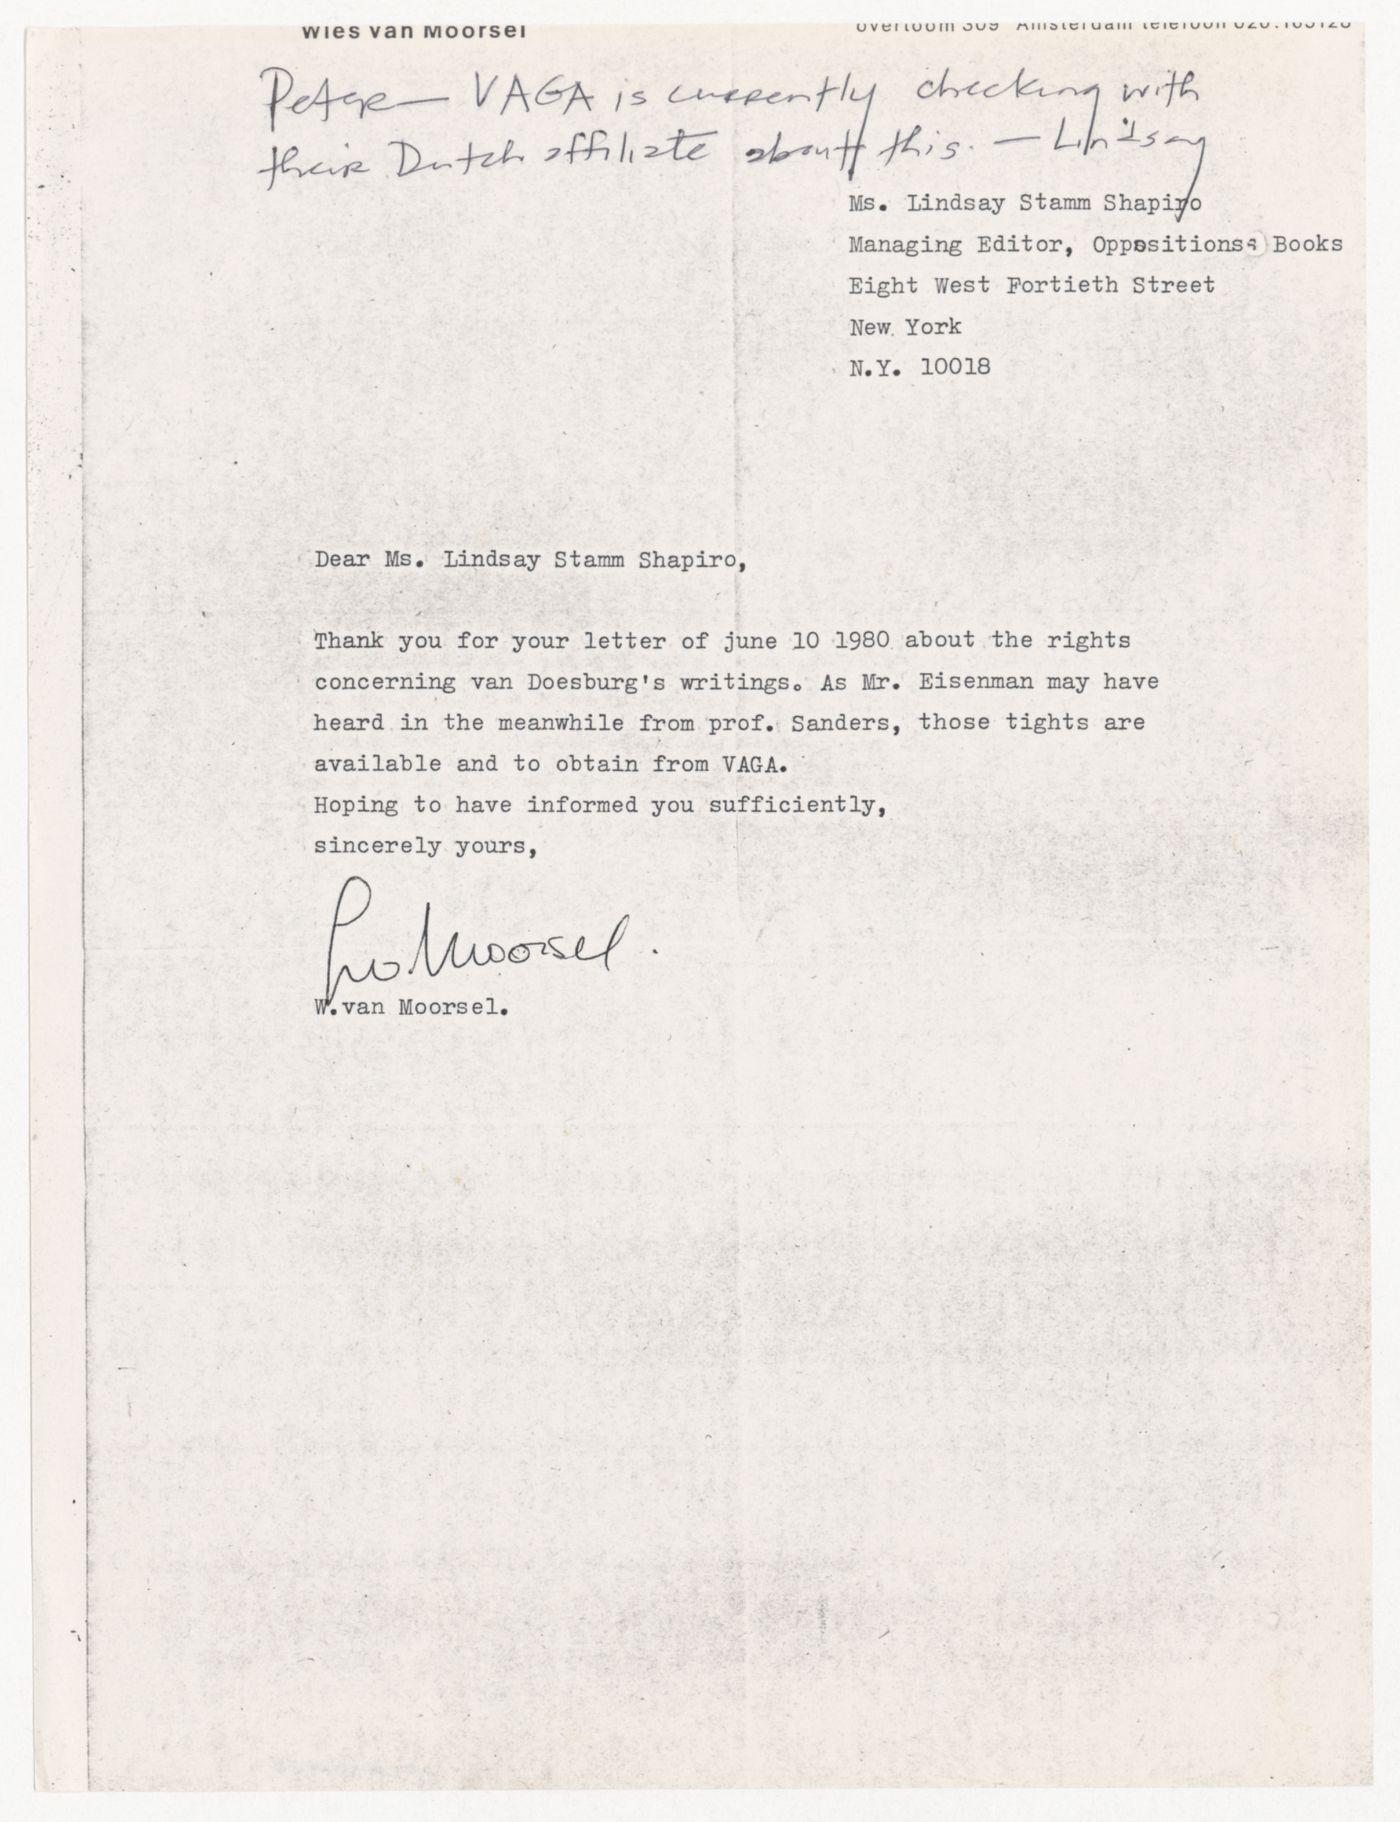 Letter from Wies van Moorsel to Lindsay Stamm Shapiro about rights to Theo van Doesburg's writing with handwritten note from Shapiro to Peter D. Eisenman